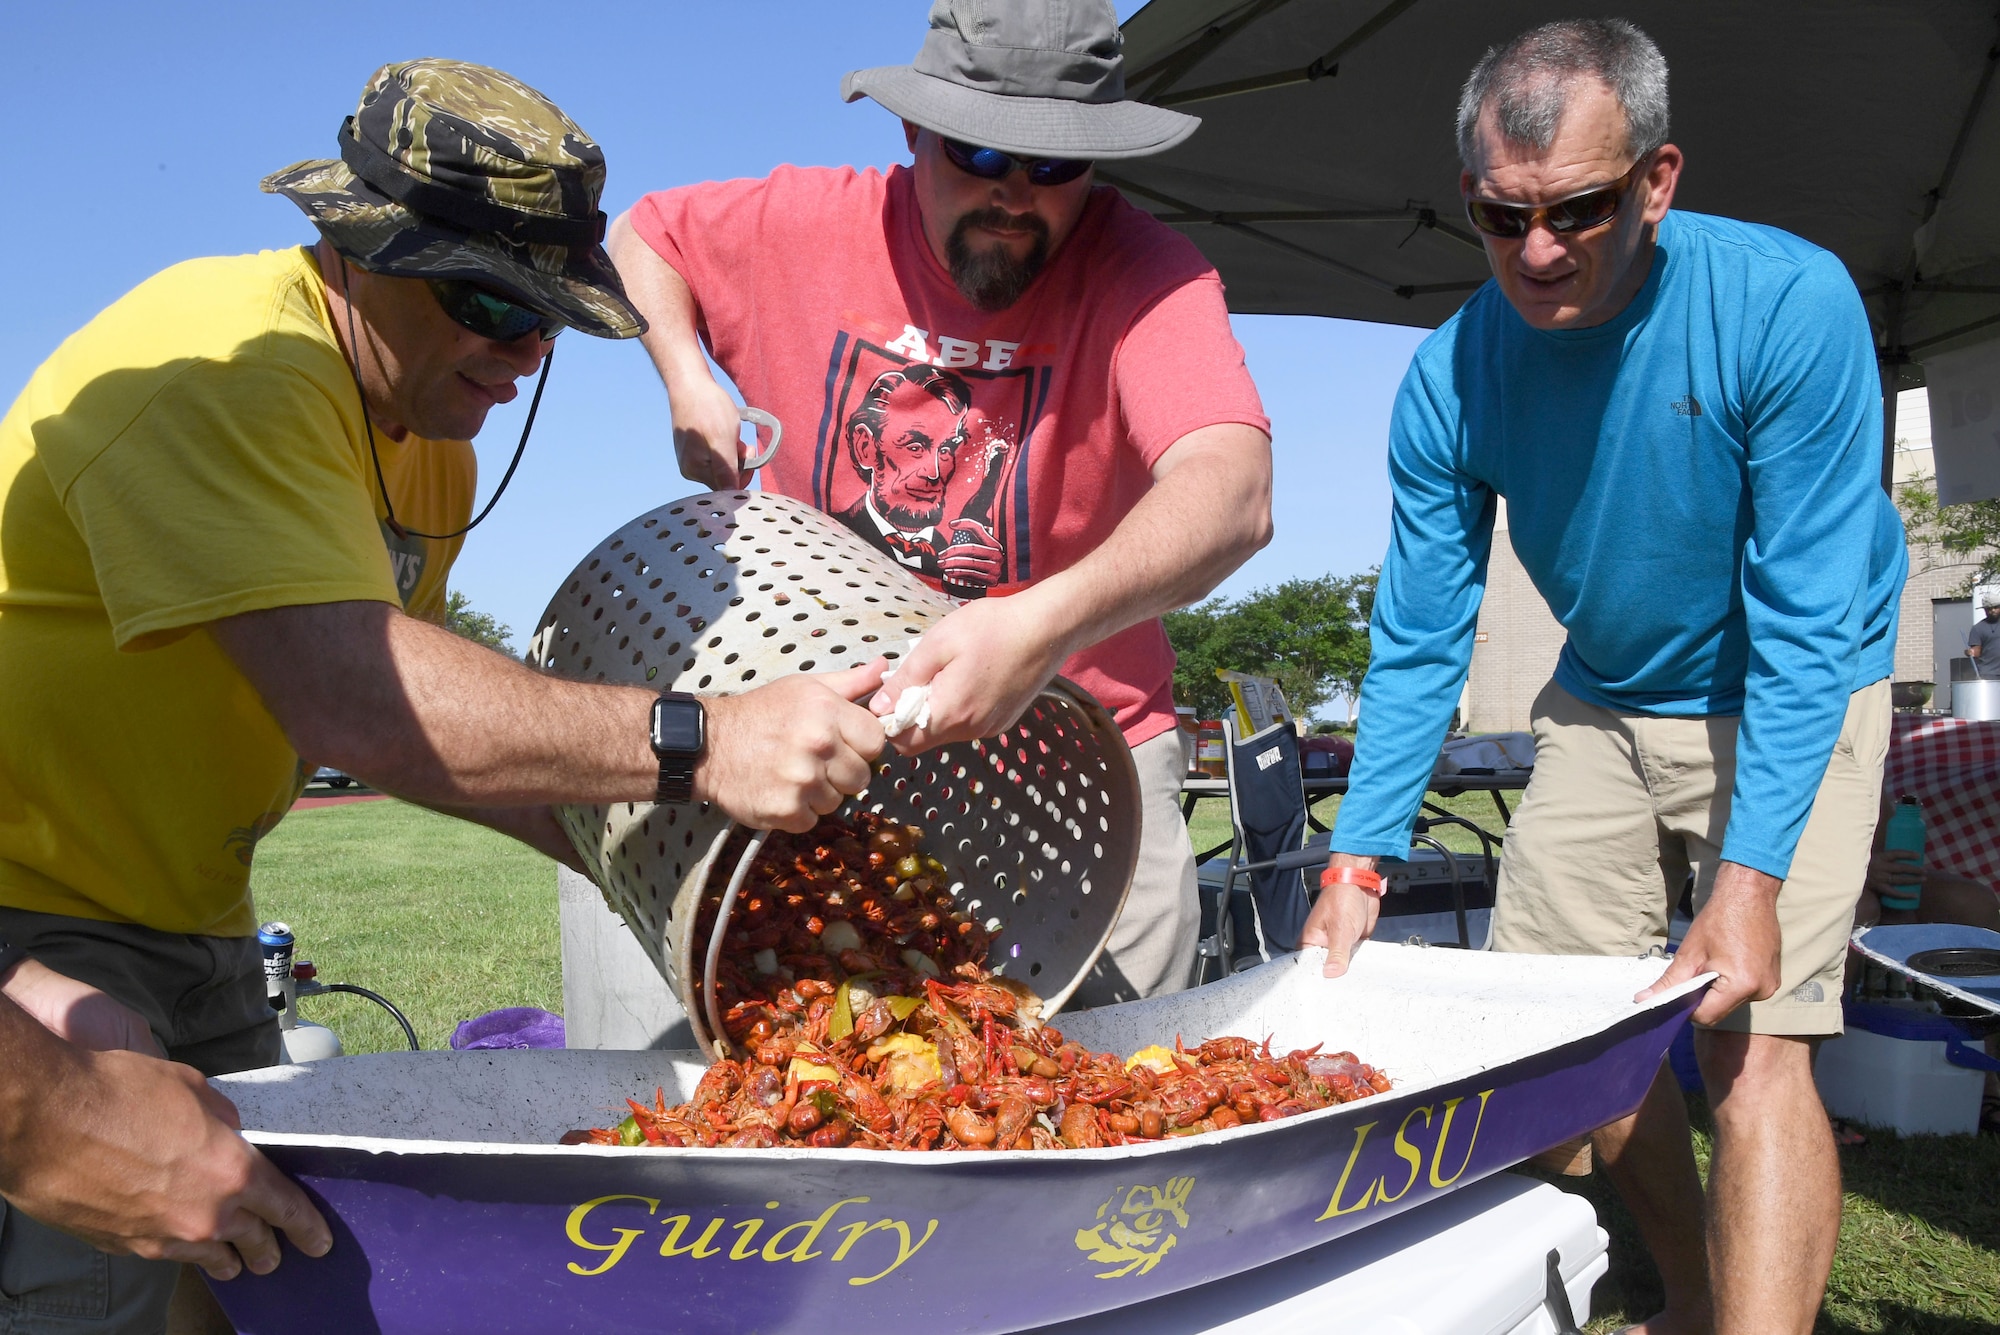 Gary Guidry, Second Air Force curriculum developer, James Reeves, Second AF training requirements action officer, and Joe Taranto, Second AF A3/6 deputy director, pours out a pot of boiled crawfish during the 9th Annual Crawfish Cook-Off at the Bay Breeze Event Center at Keesler Air Force Base, Mississippi, June 11, 2021. Twelve teams competed in the event and more than 800 pounds of crawfish were distributed. (U.S. Air Force photo by Kemberly Groue)